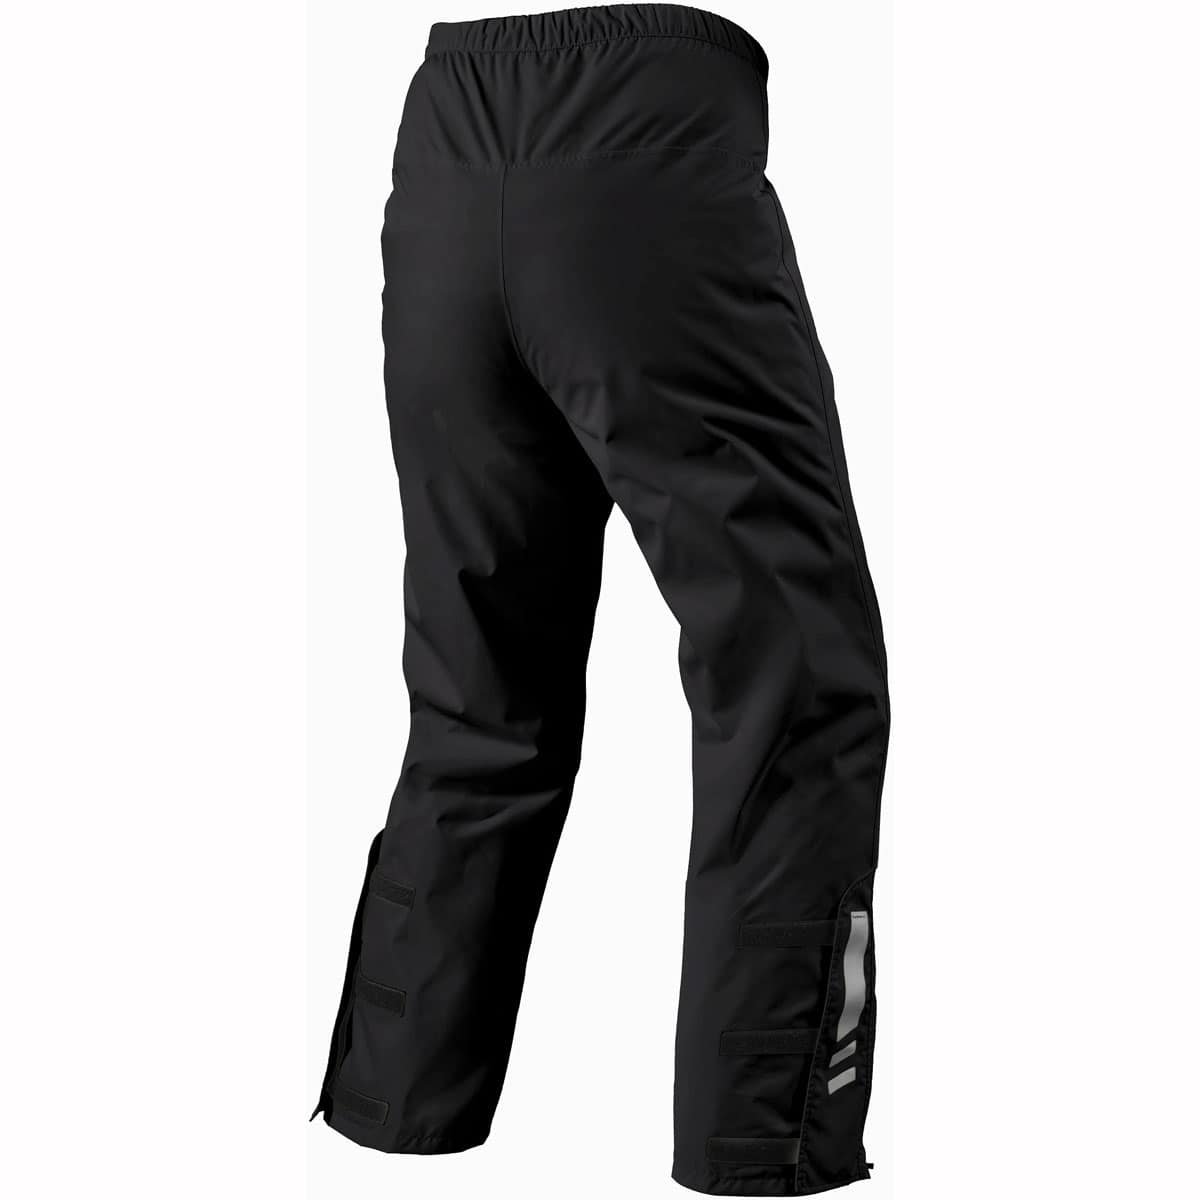 Beat the rain with the Revit Acid 4 rain overtrousers! These ultra-durable rain pants will keep you dry no matter what Mother Nature throws your way - back